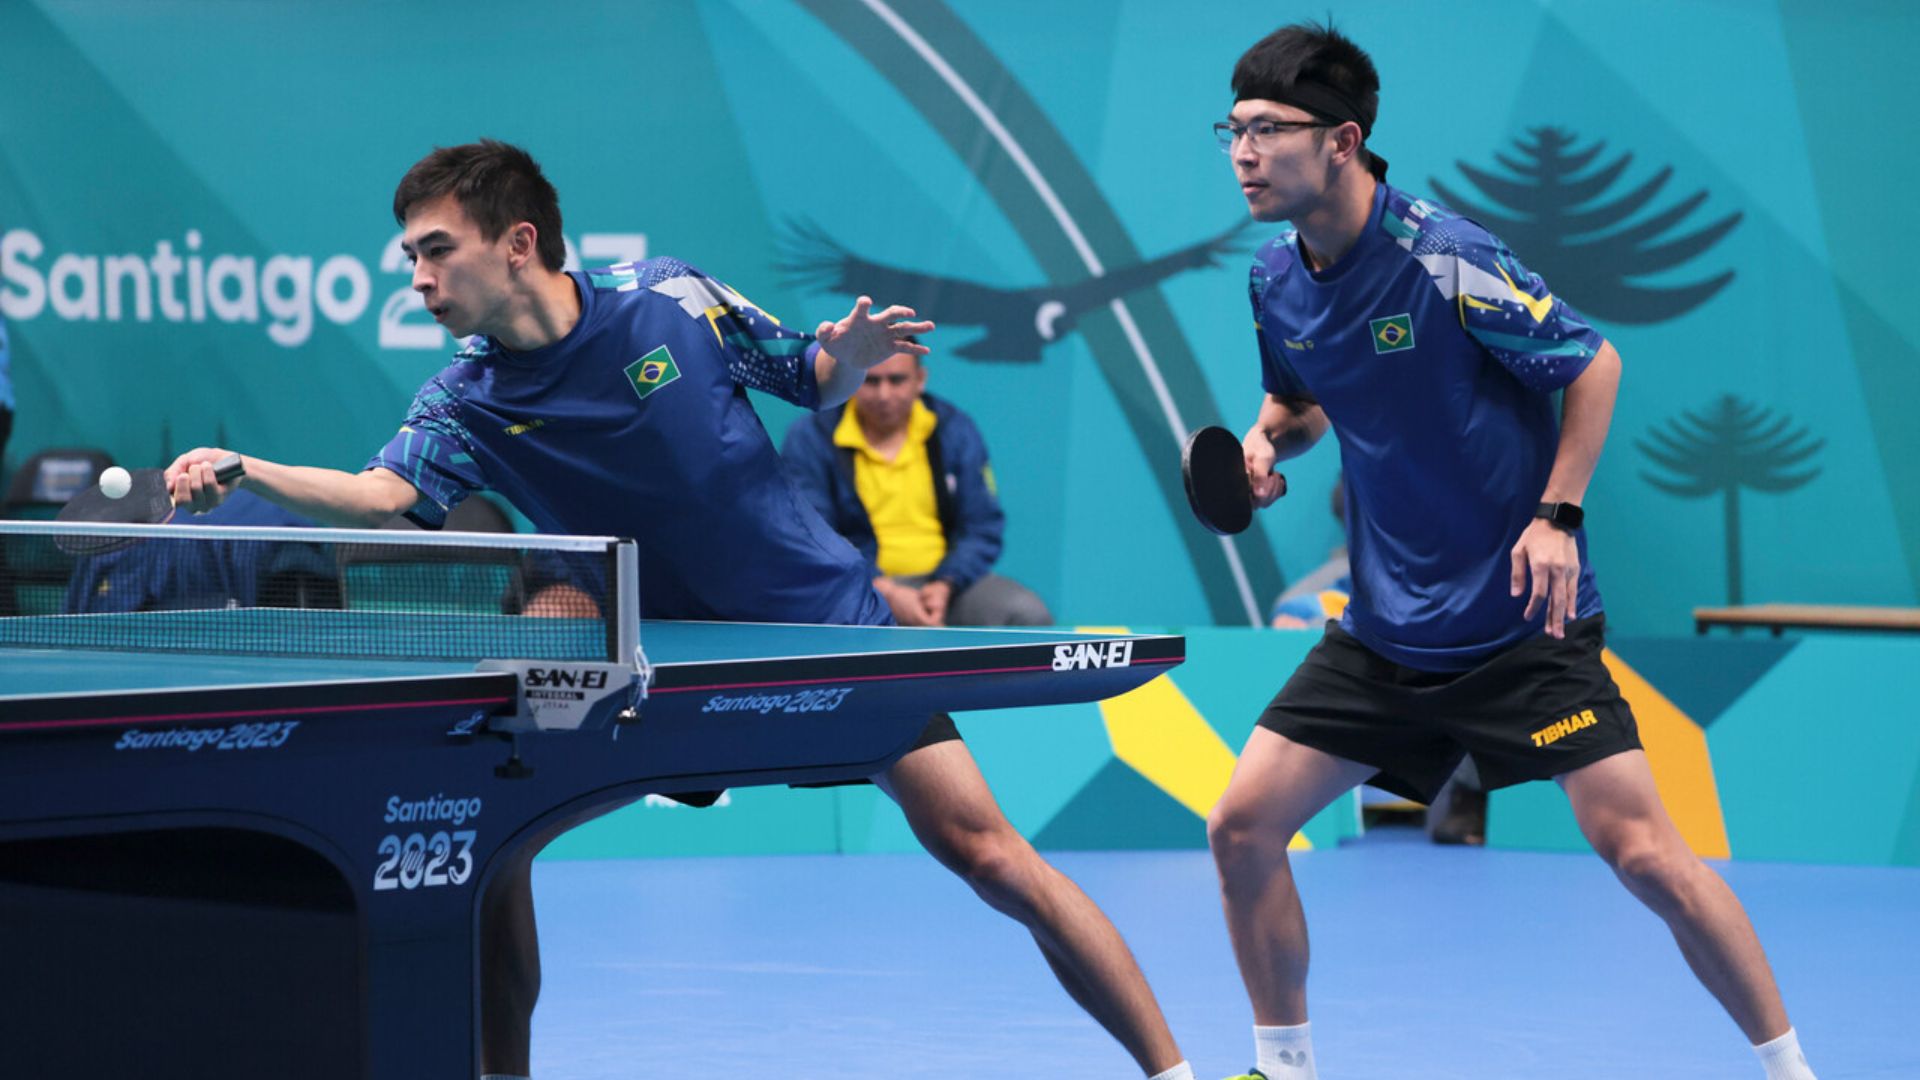 Brazil and the United States dominate in the table tennis team event